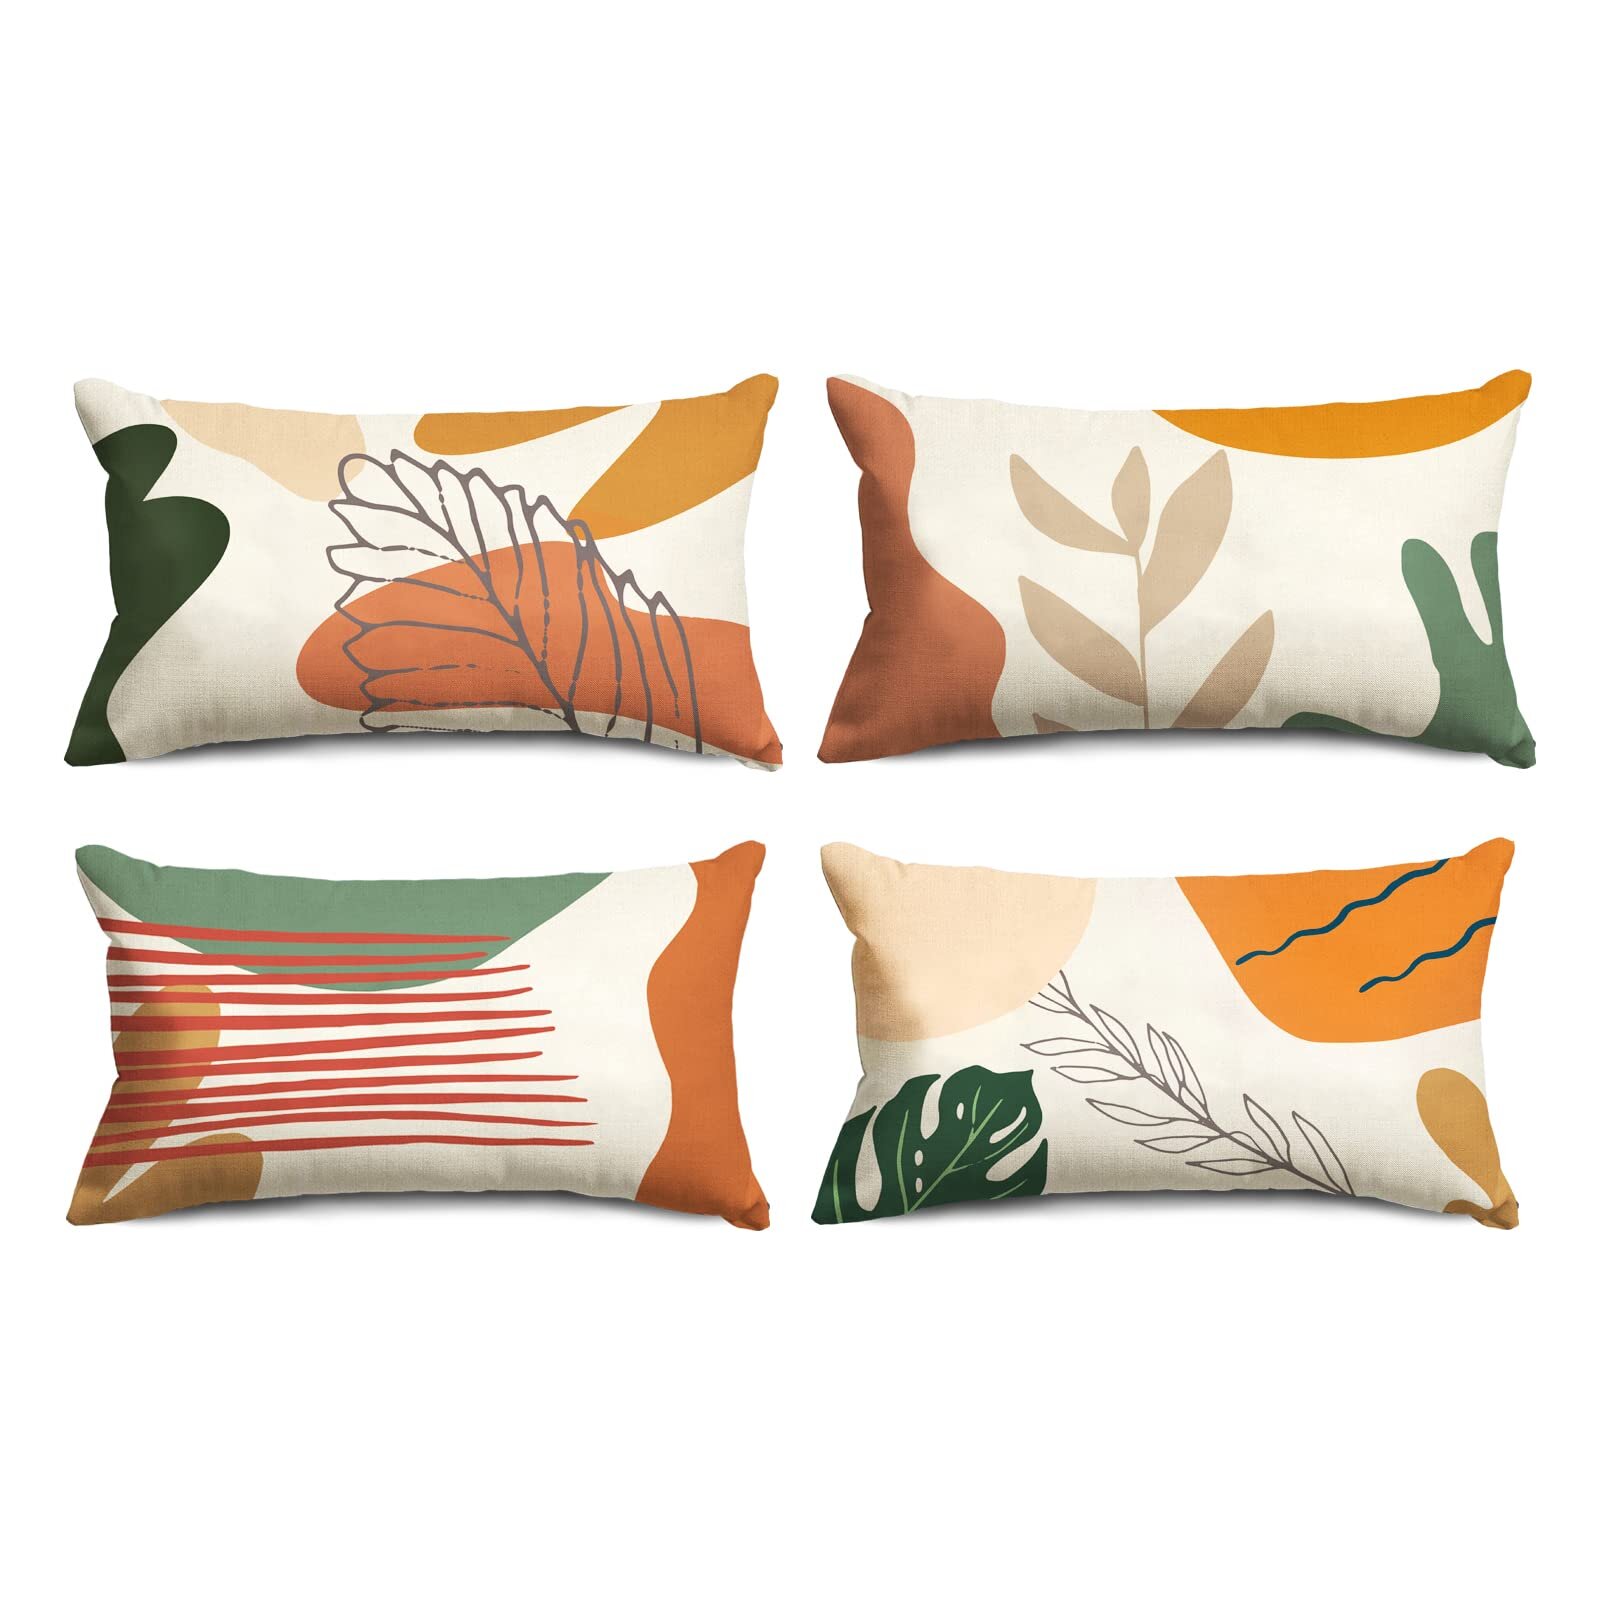 Flowers Abstract Pattern Cushion Cover Throw Pillow Case Sofa Bed Home Decor New 